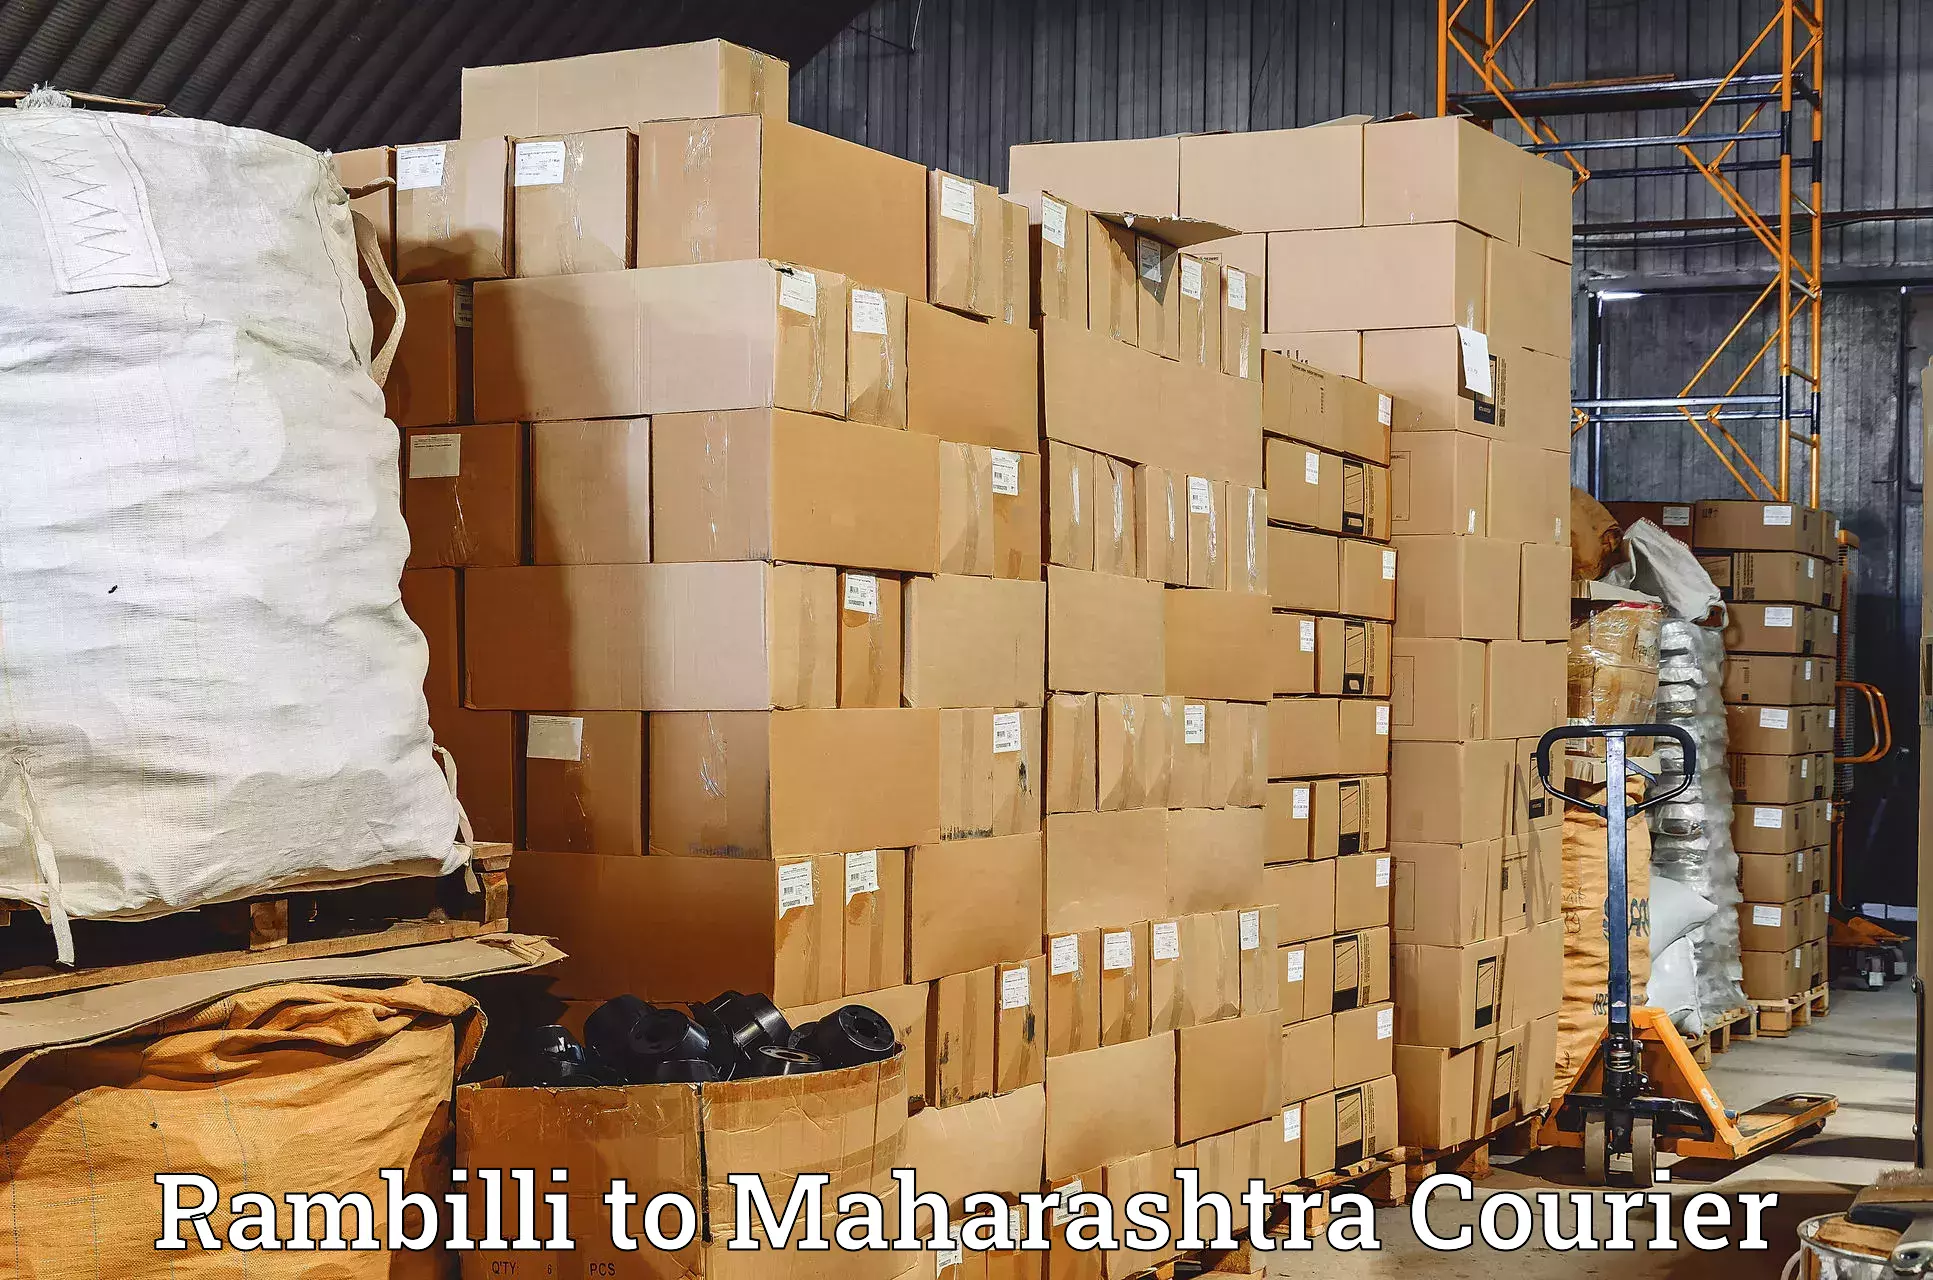 On-call courier service Rambilli to Mumbai Port